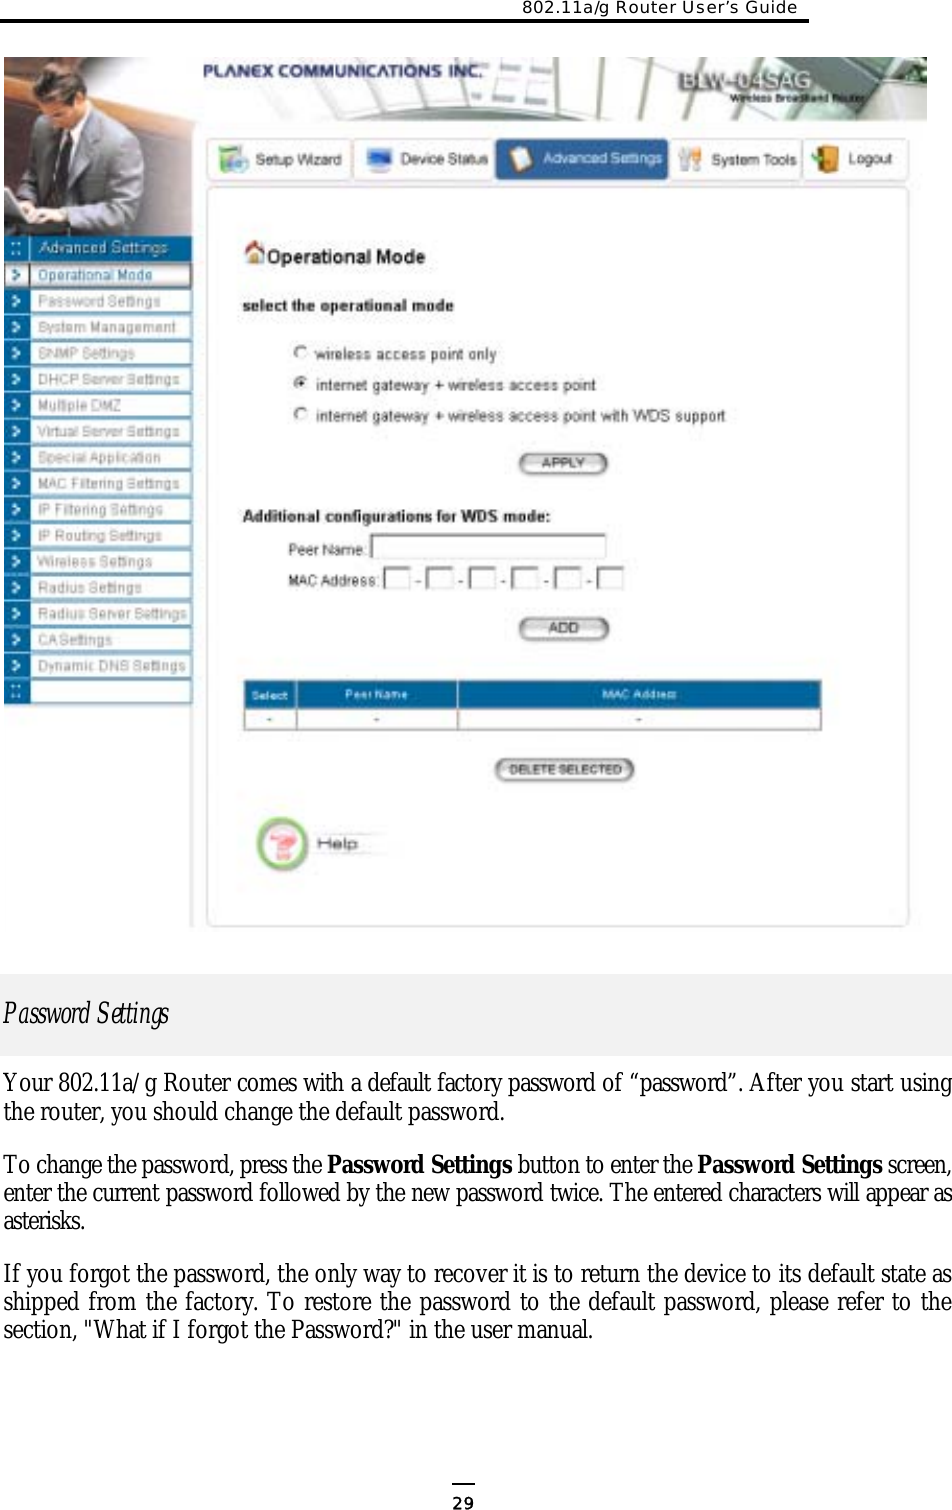 802.11a/g Router User’s Guide                   Password Settings  Your 802.11a/g Router comes with a default factory password of “password”. After you start using the router, you should change the default password. To change the password, press the Password Settings button to enter the Password Settings screen, enter the current password followed by the new password twice. The entered characters will appear as asterisks. If you forgot the password, the only way to recover it is to return the device to its default state as shipped from the factory. To restore the password to the default password, please refer to the section, &quot;What if I forgot the Password?&quot; in the user manual.      29